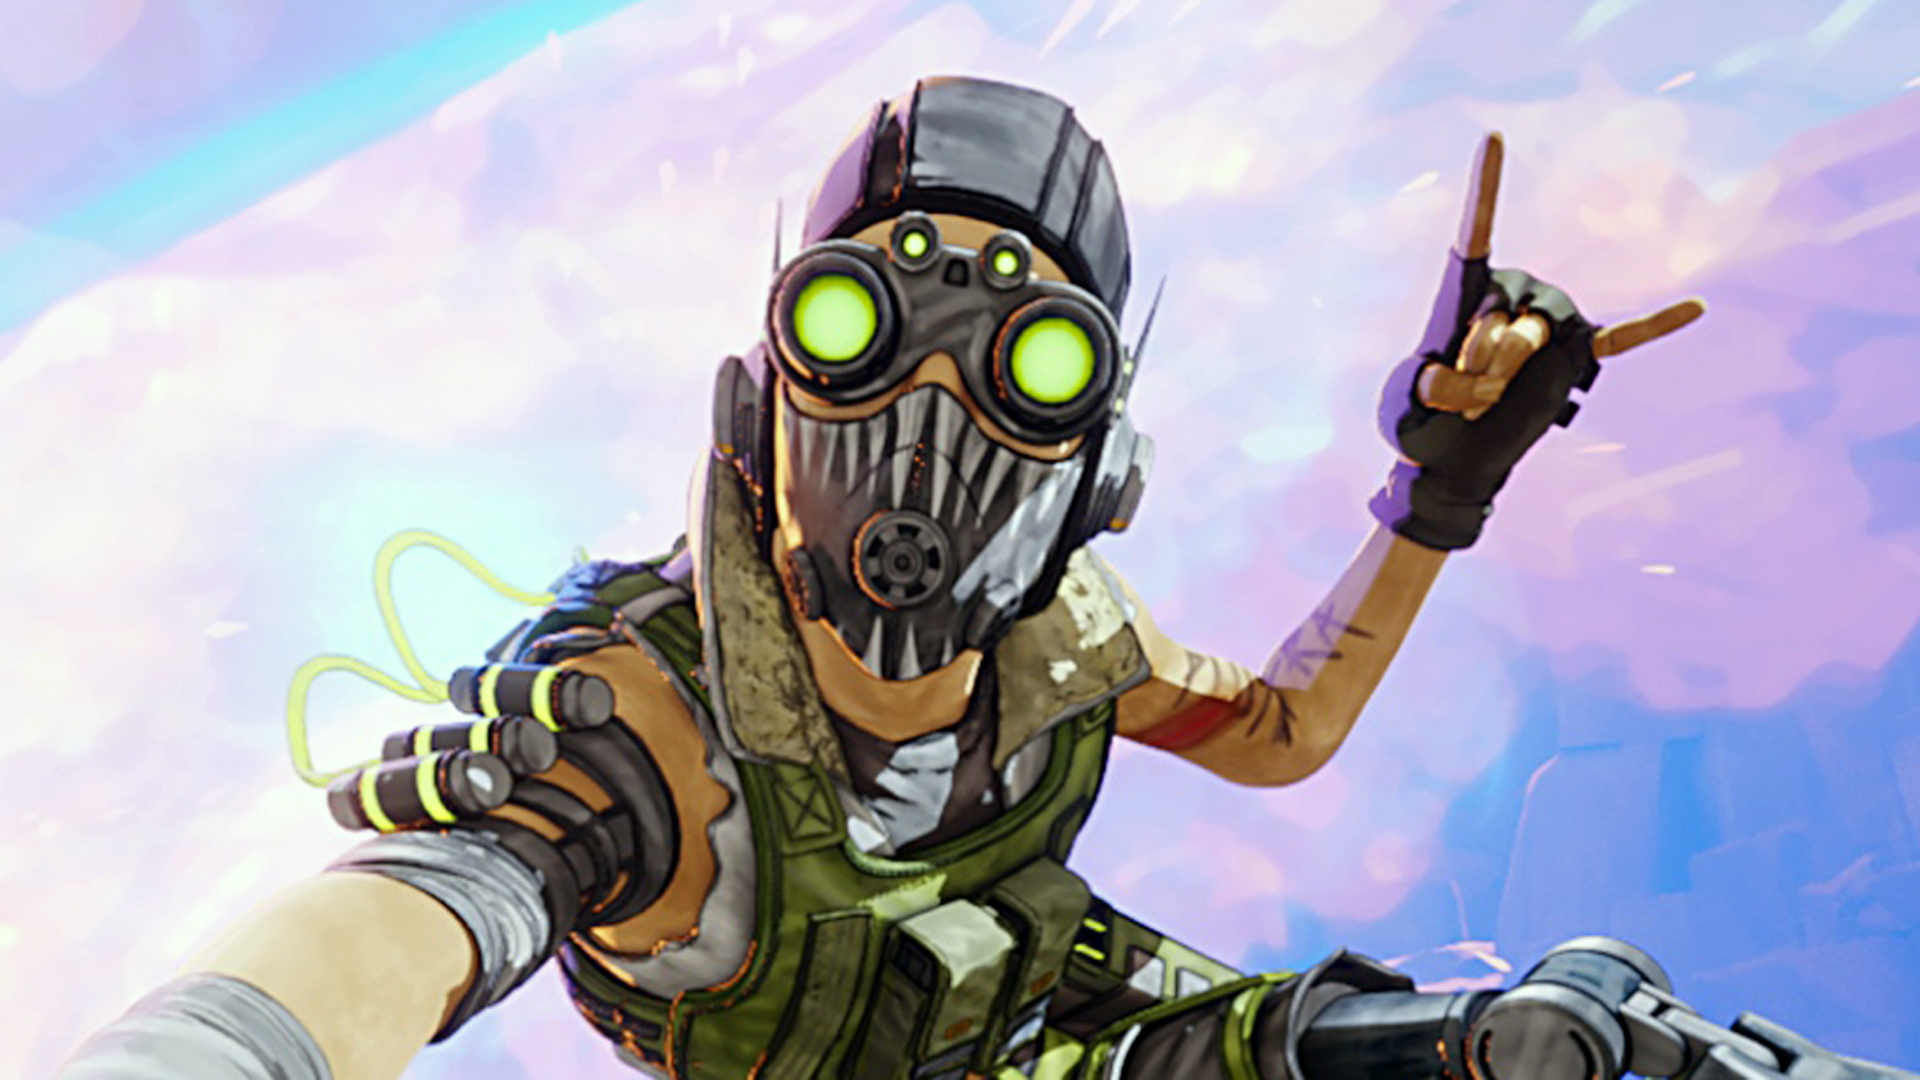 Posing too hard crashes Apex Legends, but a fix is coming